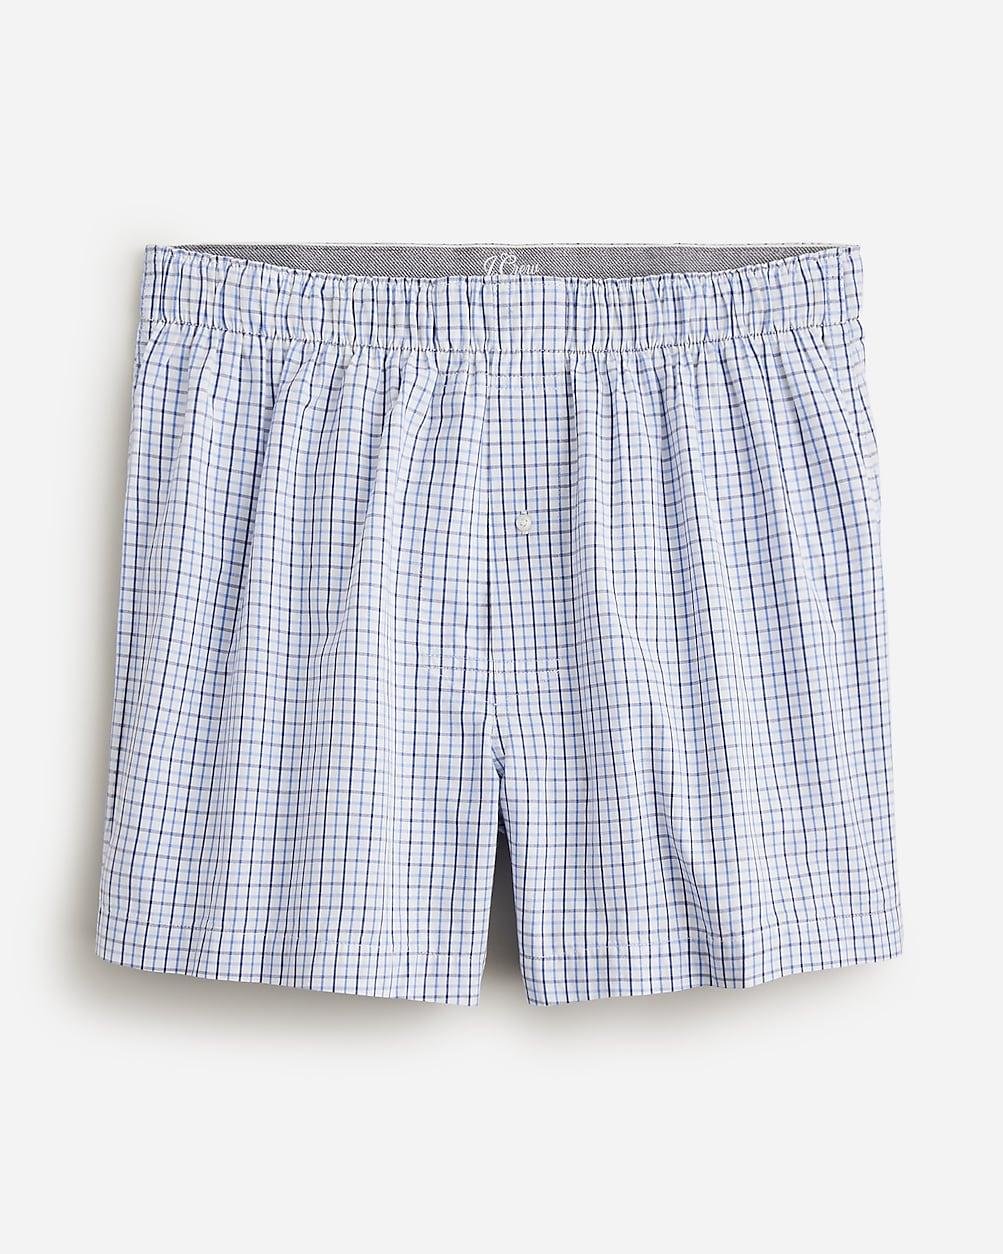 Patterned boxers by J.CREW